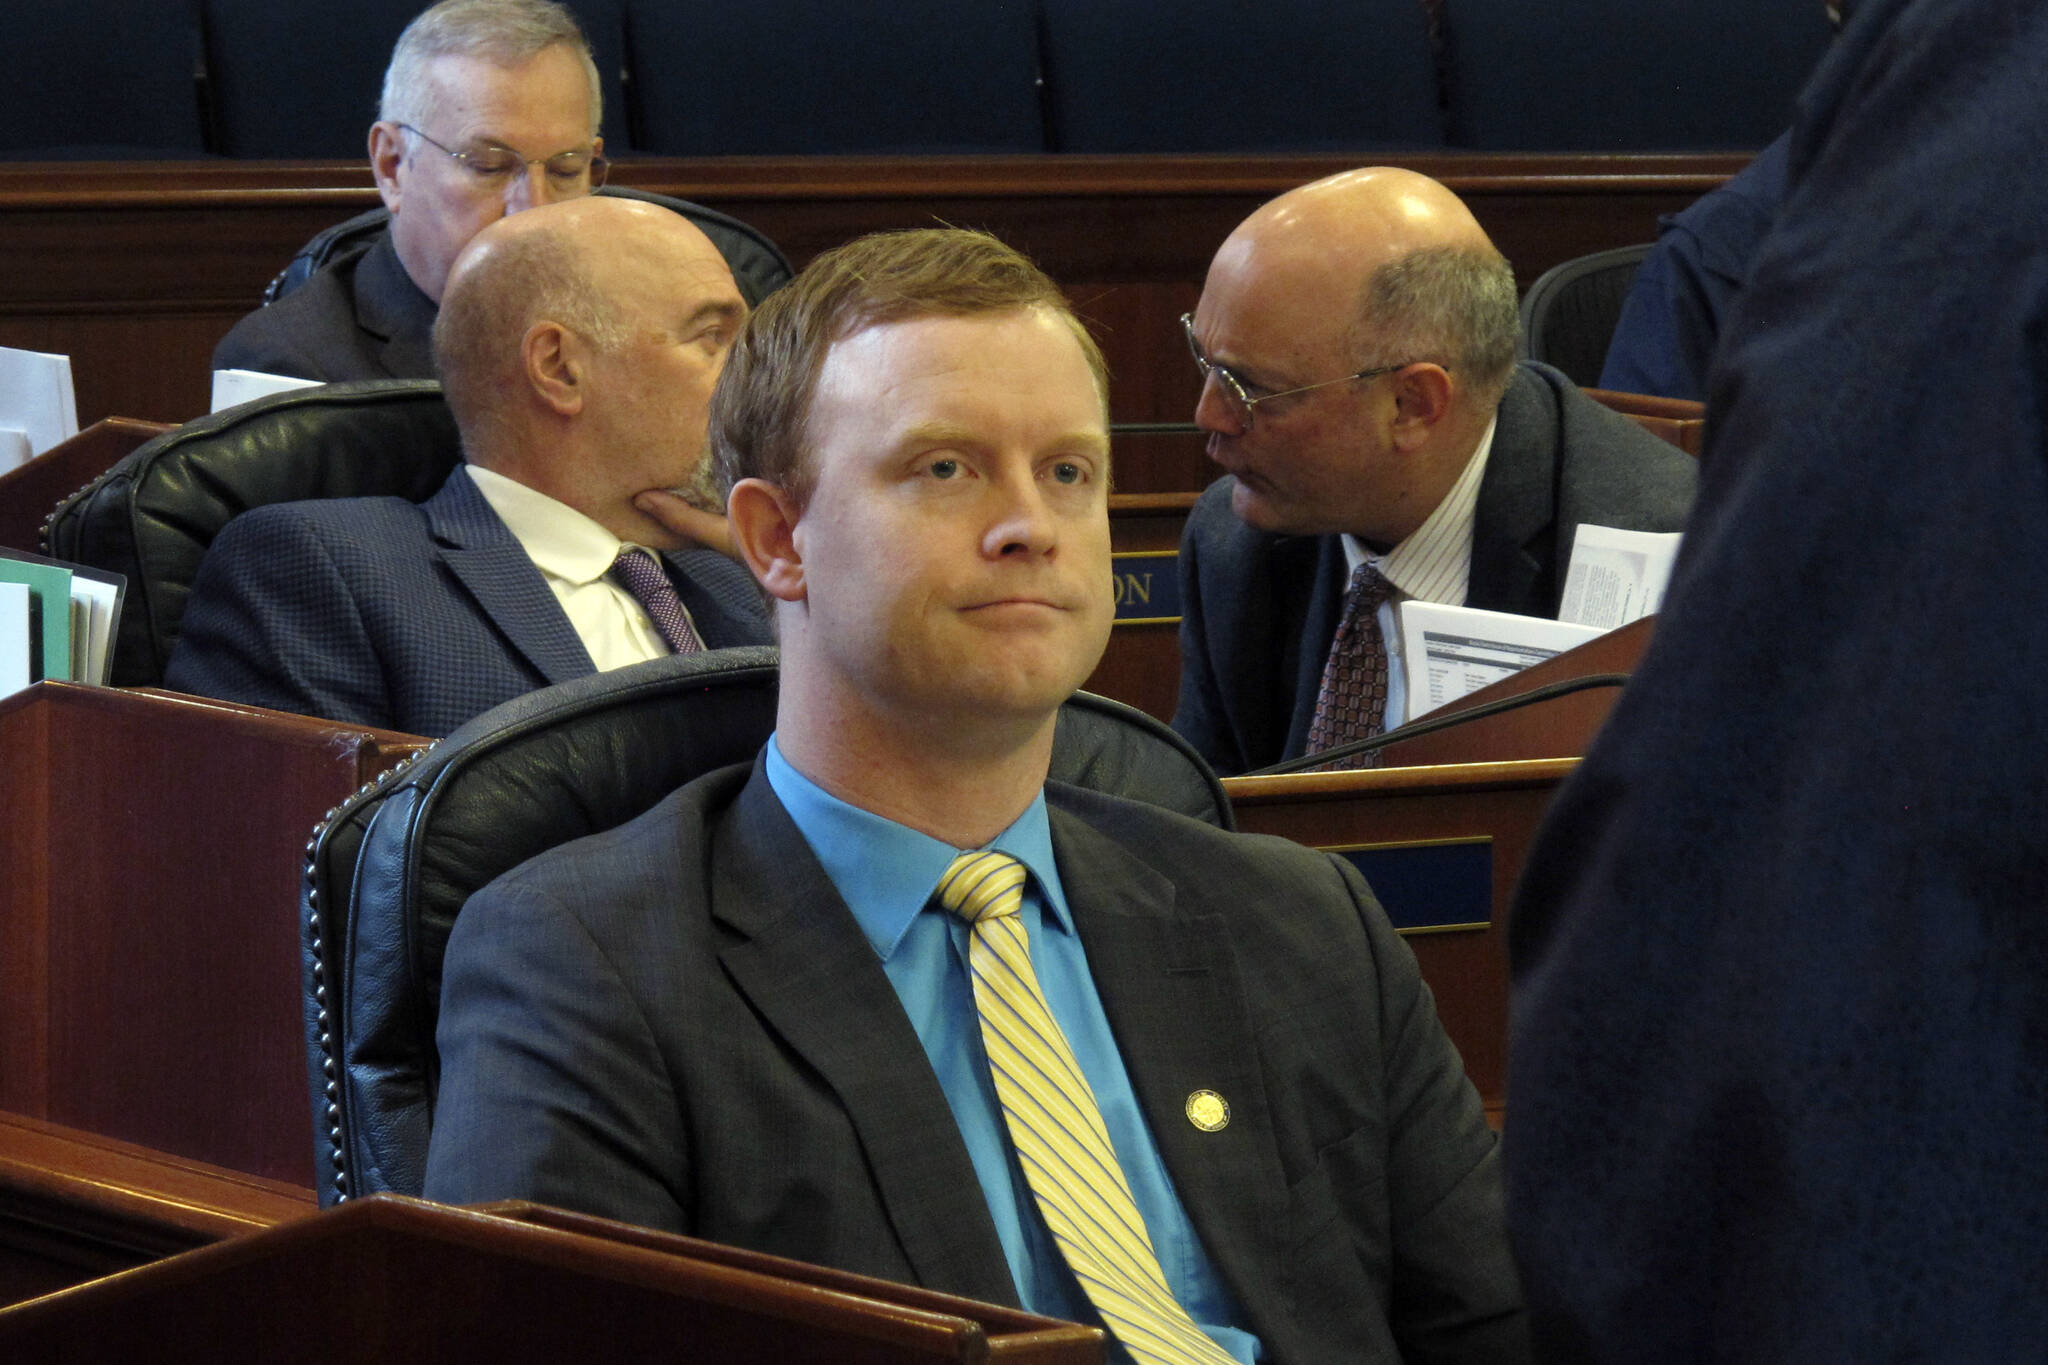 Alaska state Rep. David Eastman, R-Wasilla, sits in the House on April 29, 2022, in Juneau, Alaska. Eastman, accused of violating the state constitution's disloyalty clause over his lifetime membership in Oath Keepers, has not condemned the organization in the wake of the Jan. 6, 2021, insurrection at the U.S Capitol. "No, I generally don't condemn groups," Eastman, a Wasilla Republican, said during his bench hearing on Thursday, Dec. 15, 2022, his second day on the witness stand. (AP Photo / Becky Bohrer, File)